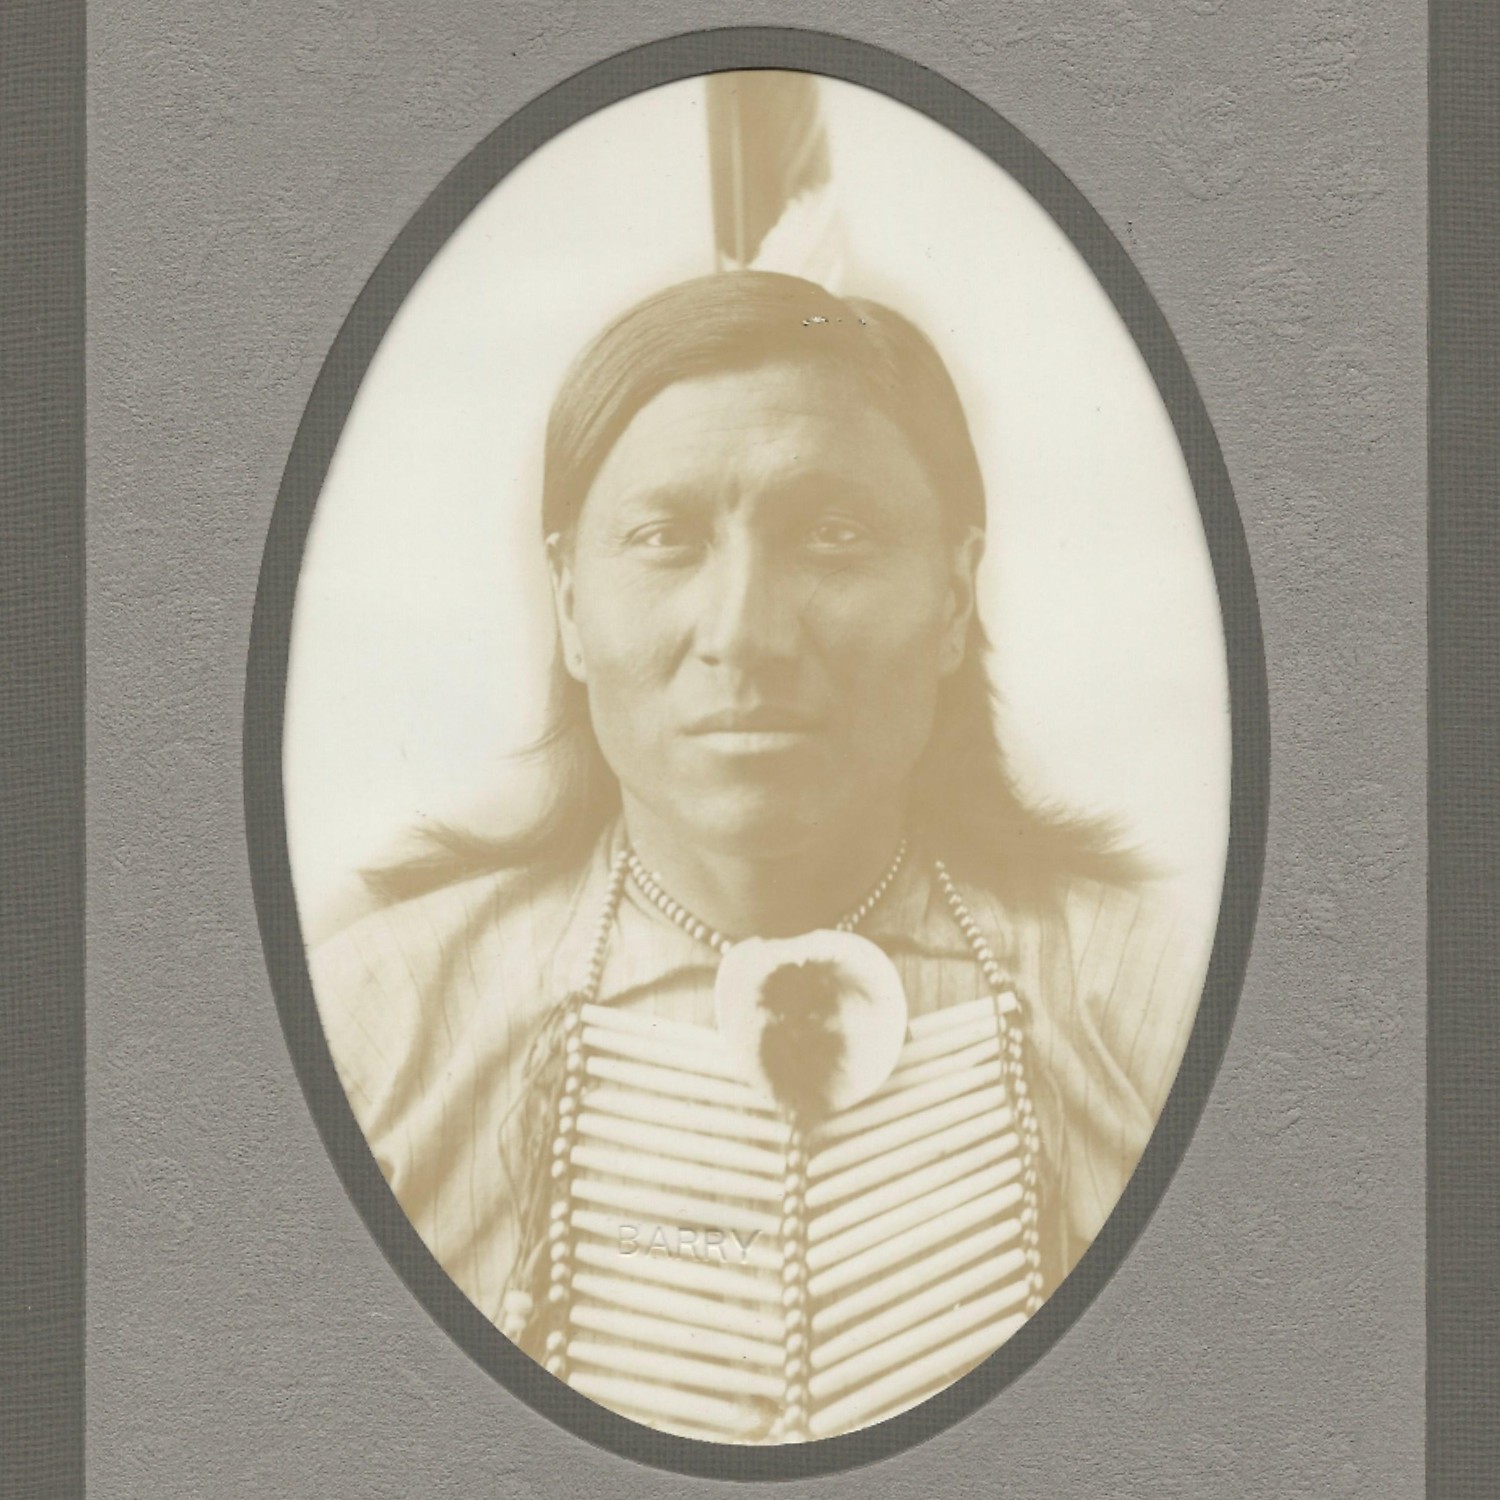 Photograph of Chief Deep Water, Indian Dakota by D.F. Barry